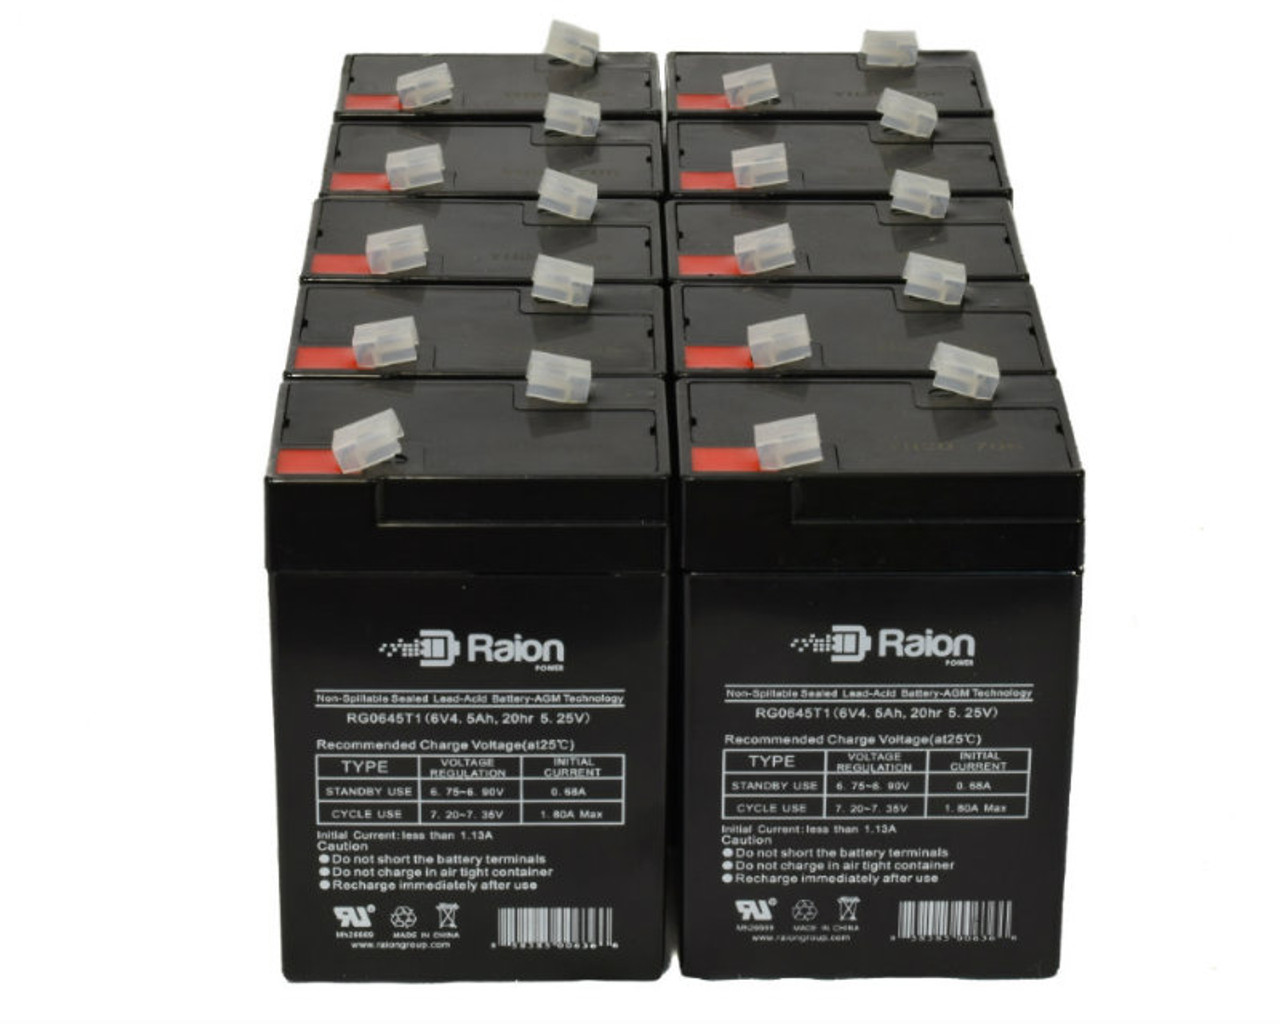 Raion Power 6V 4.5Ah Replacement Emergency Light Battery for Sure-Lites SL26117 - 10 Pack